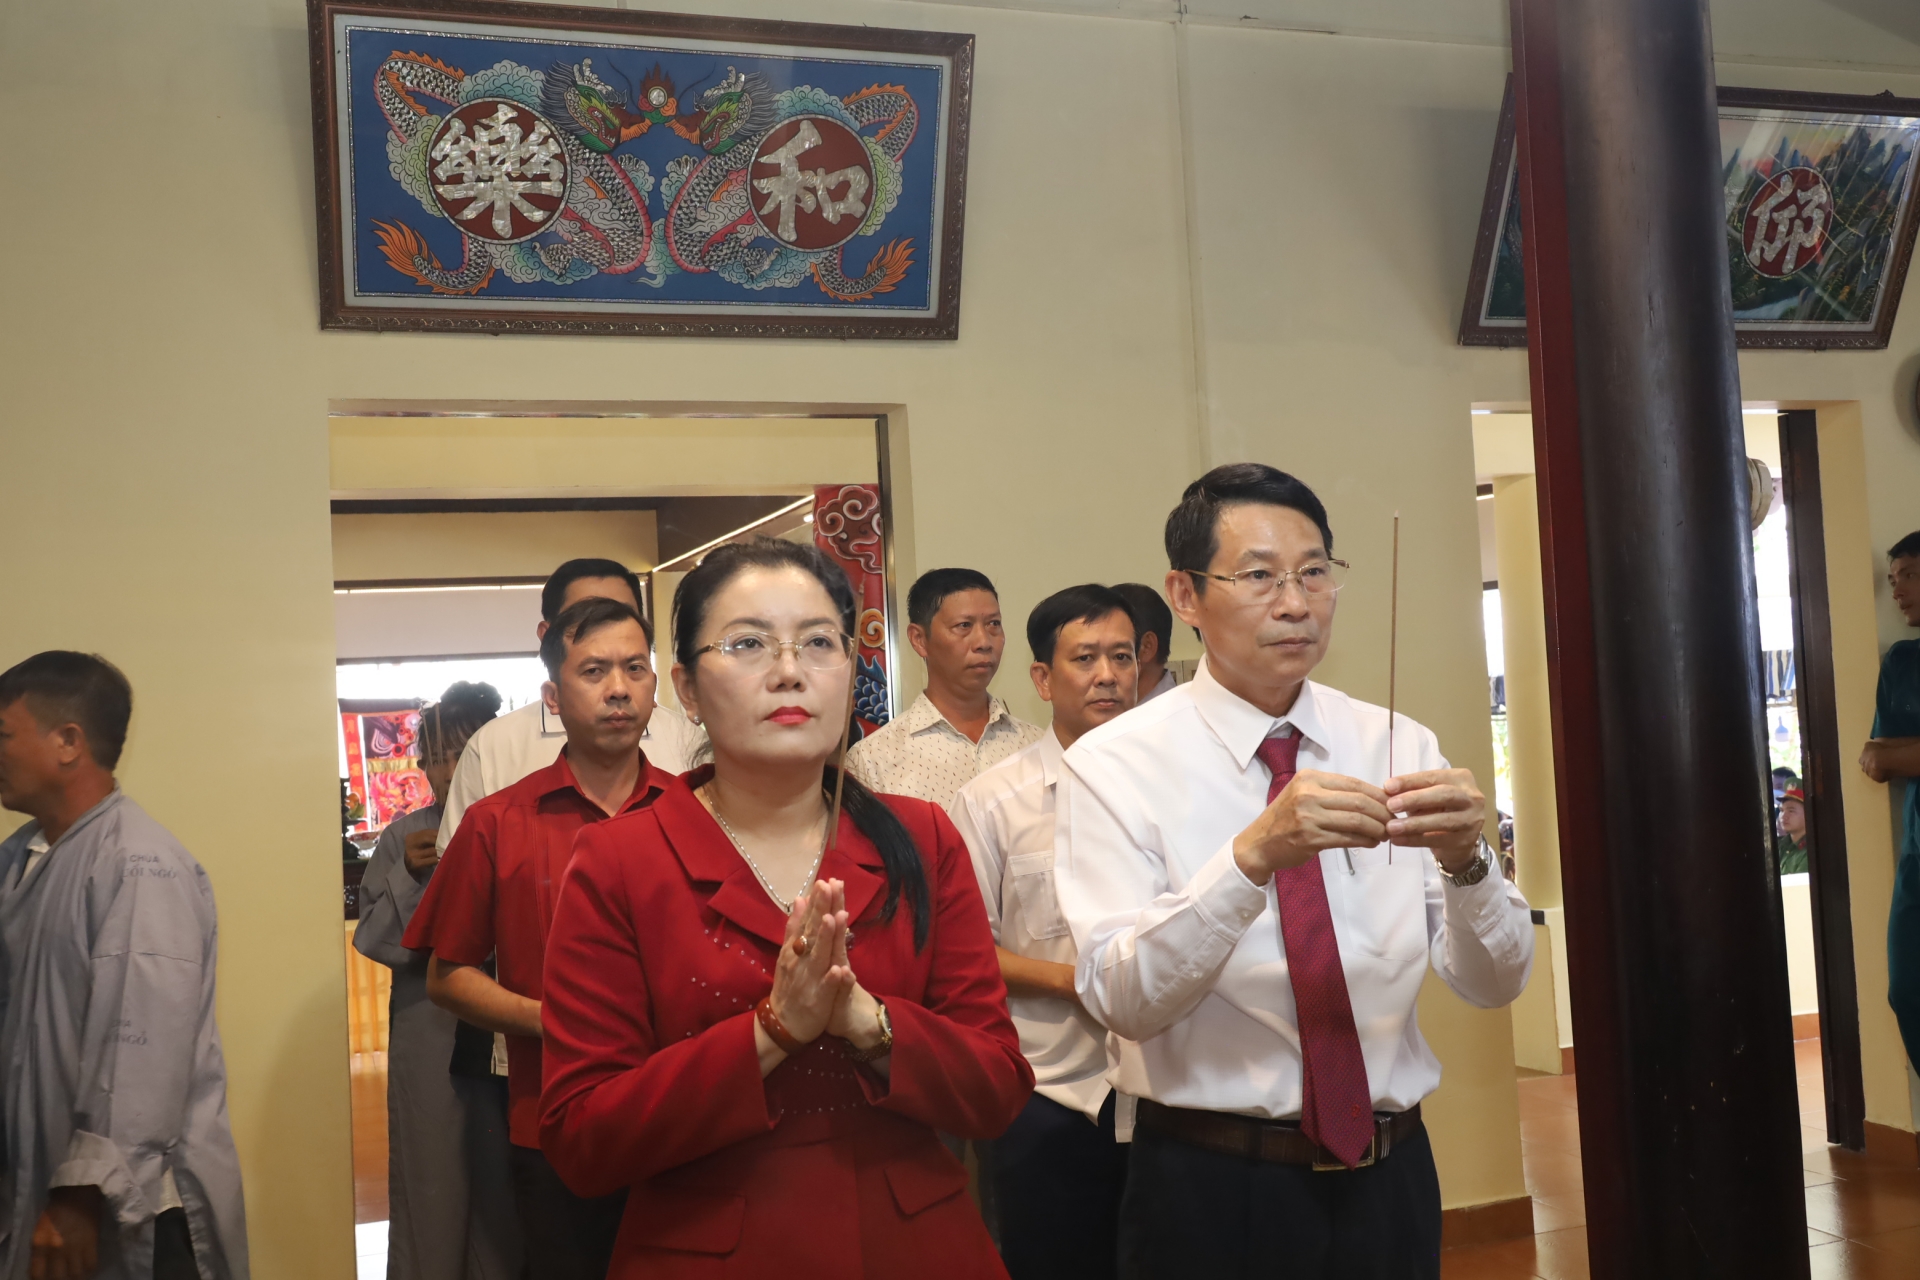 Pham Thi Xuan Trang and Dinh Van Thieu offering incense to the Holy Mother

